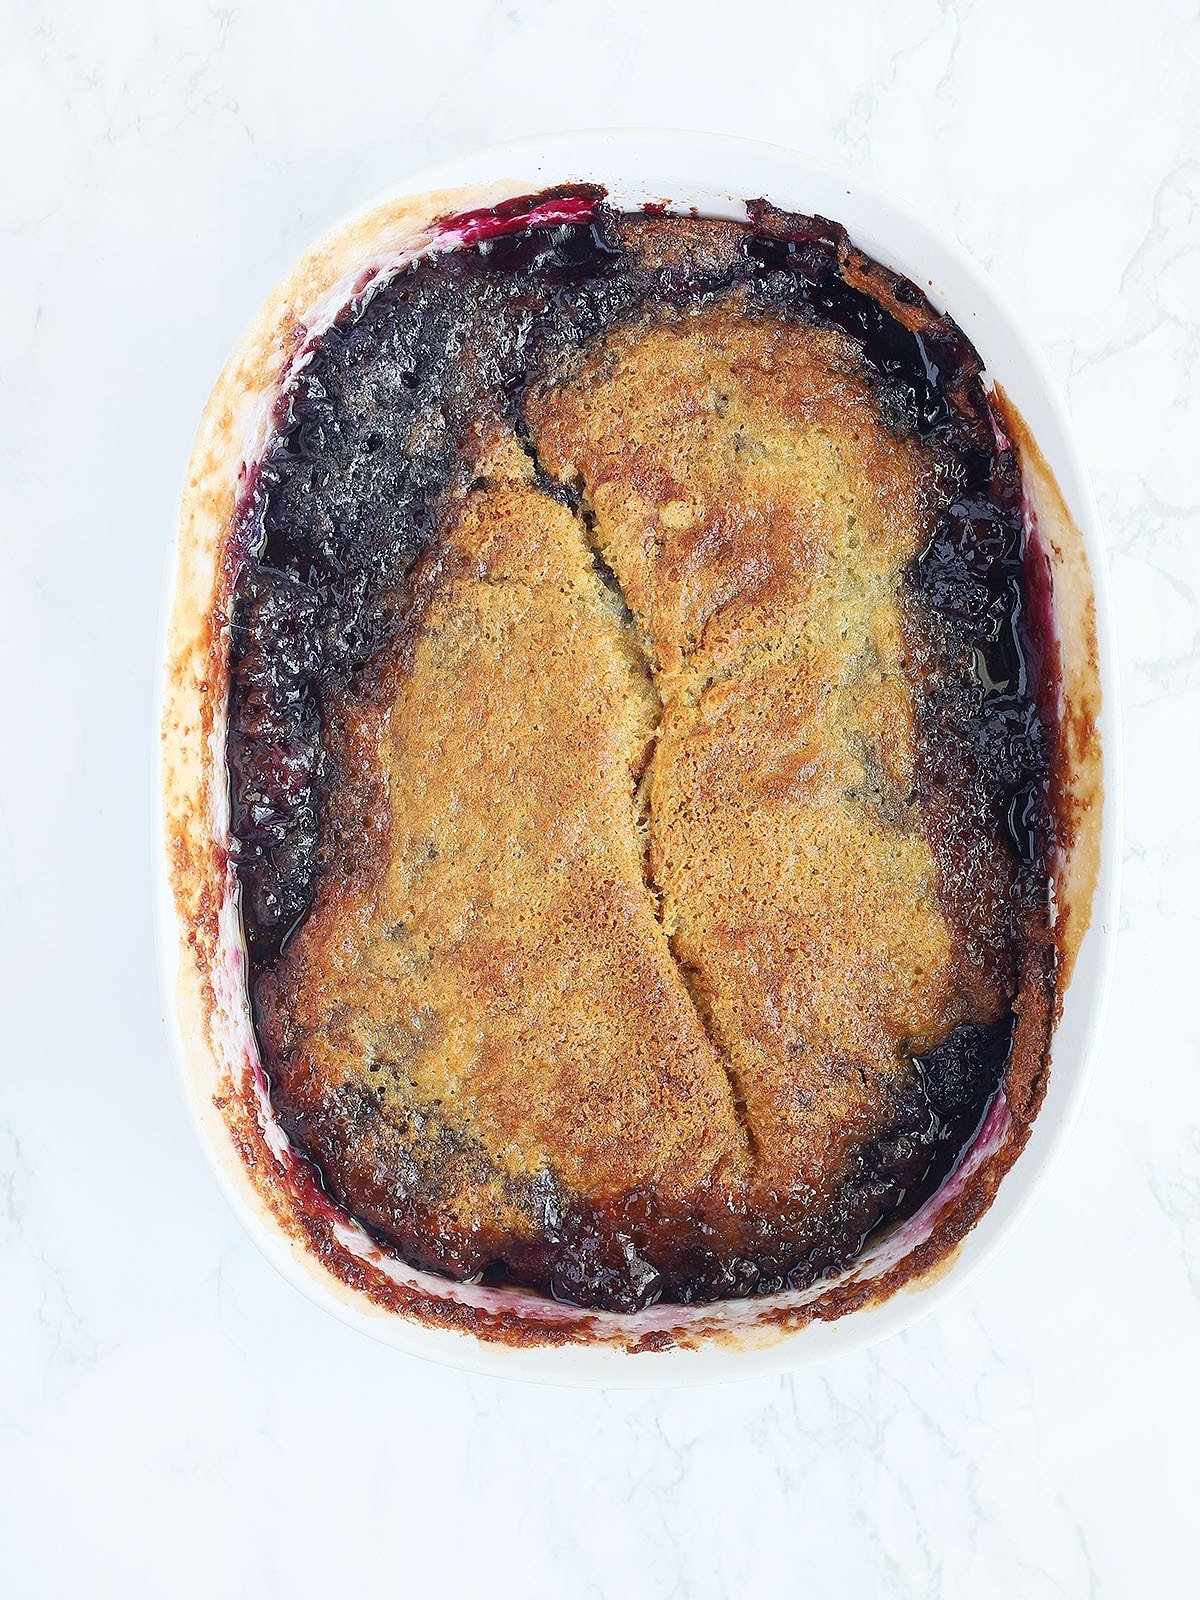 baked old-fashioned blackberry cobbler recipe right out of the oven